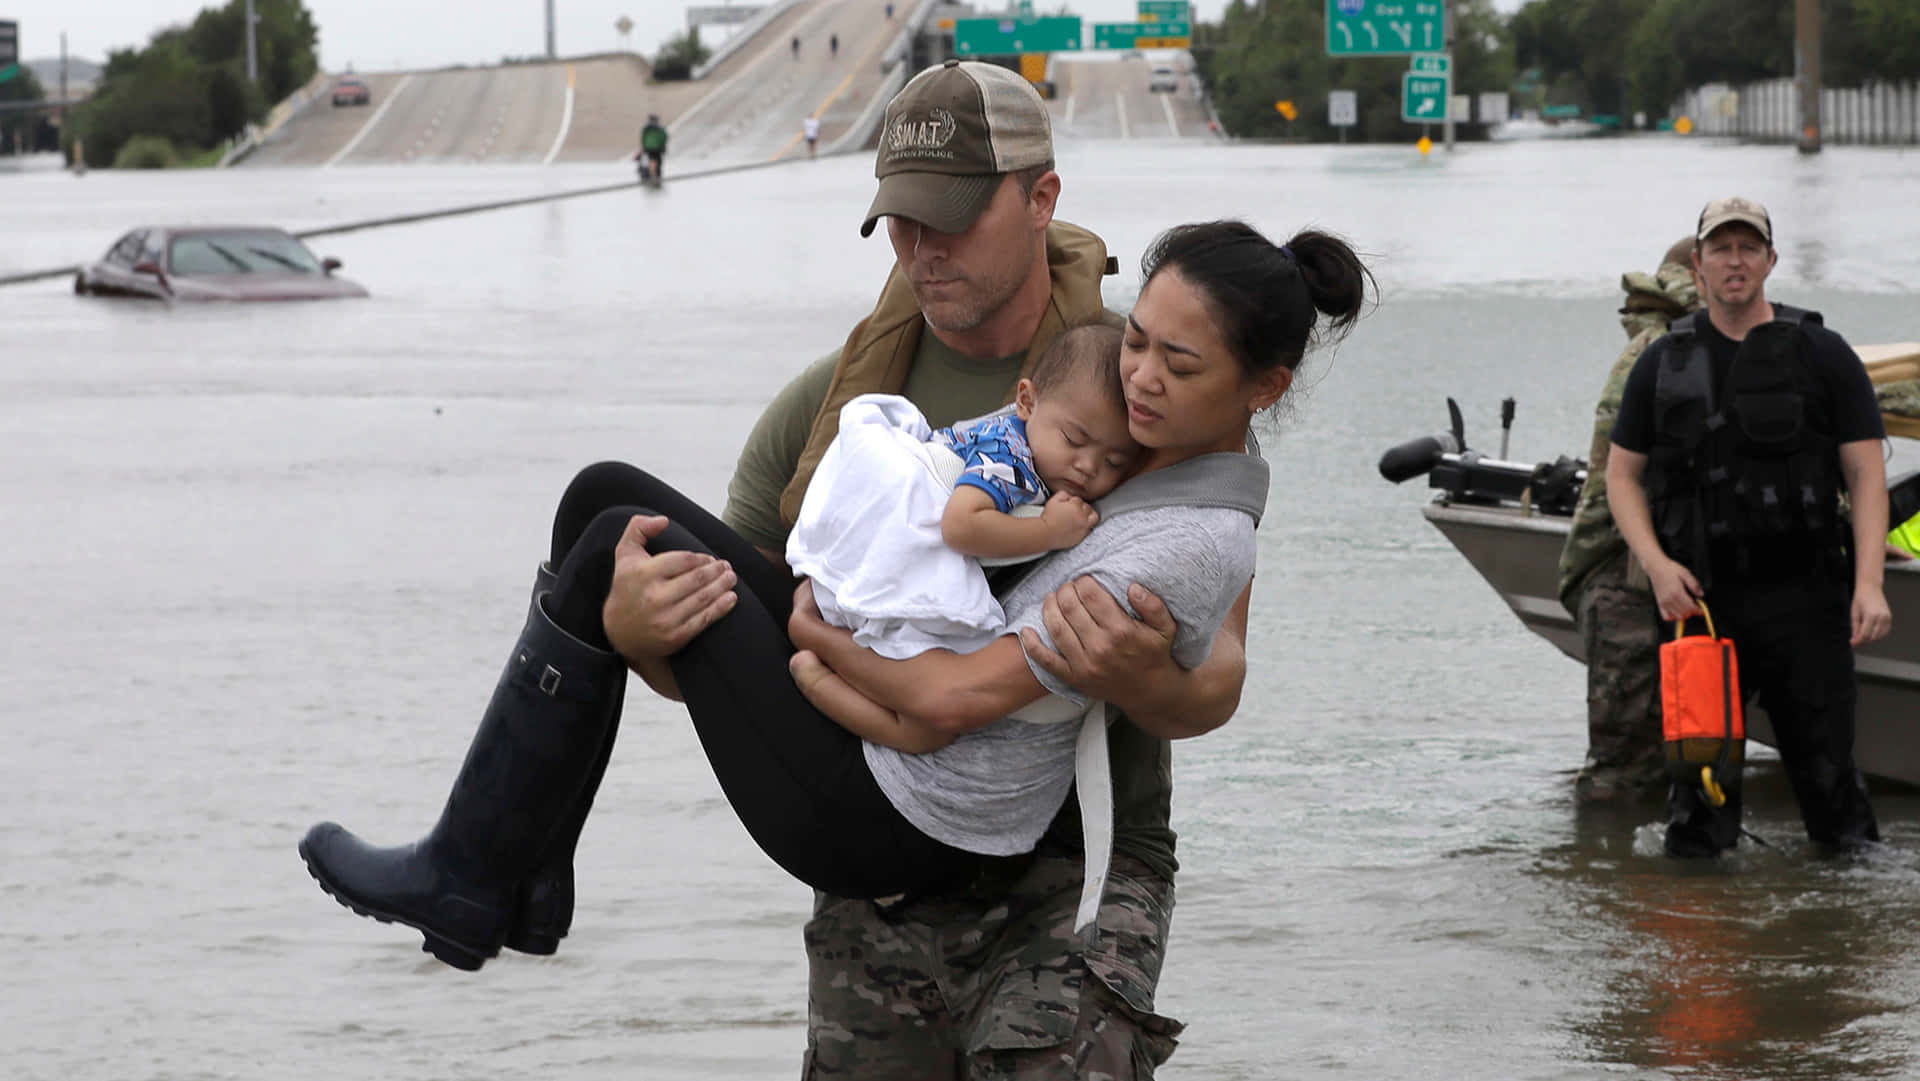 A Man Is Carrying A Child Through A Flooded Street